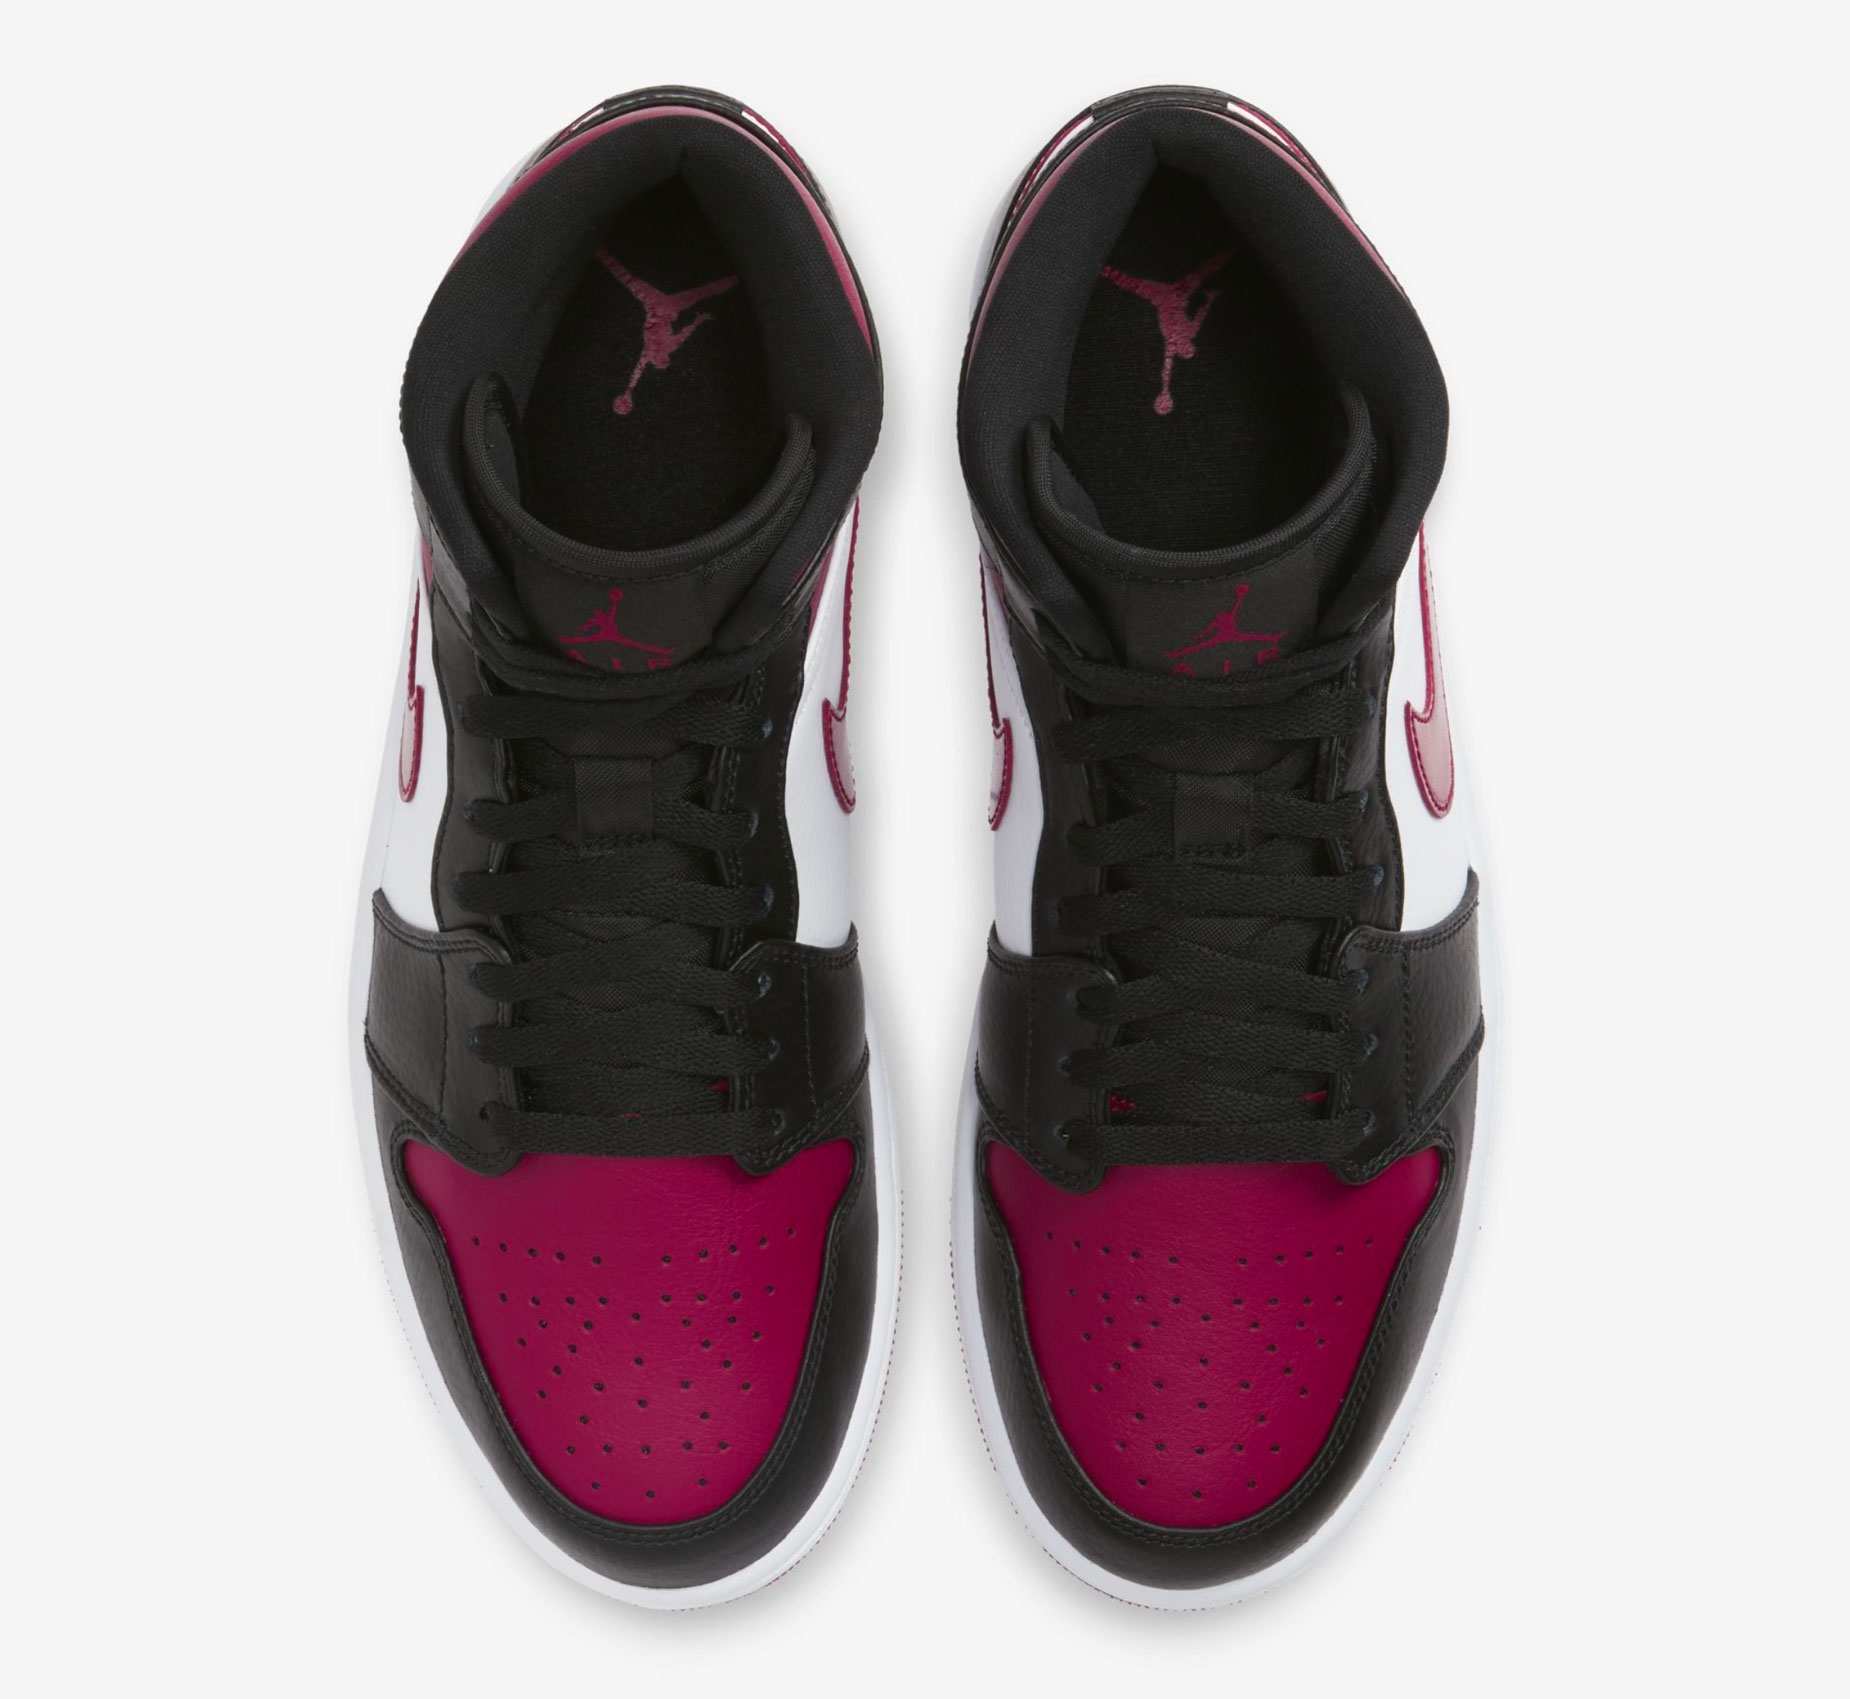 jordan 1 mid noble red outfit